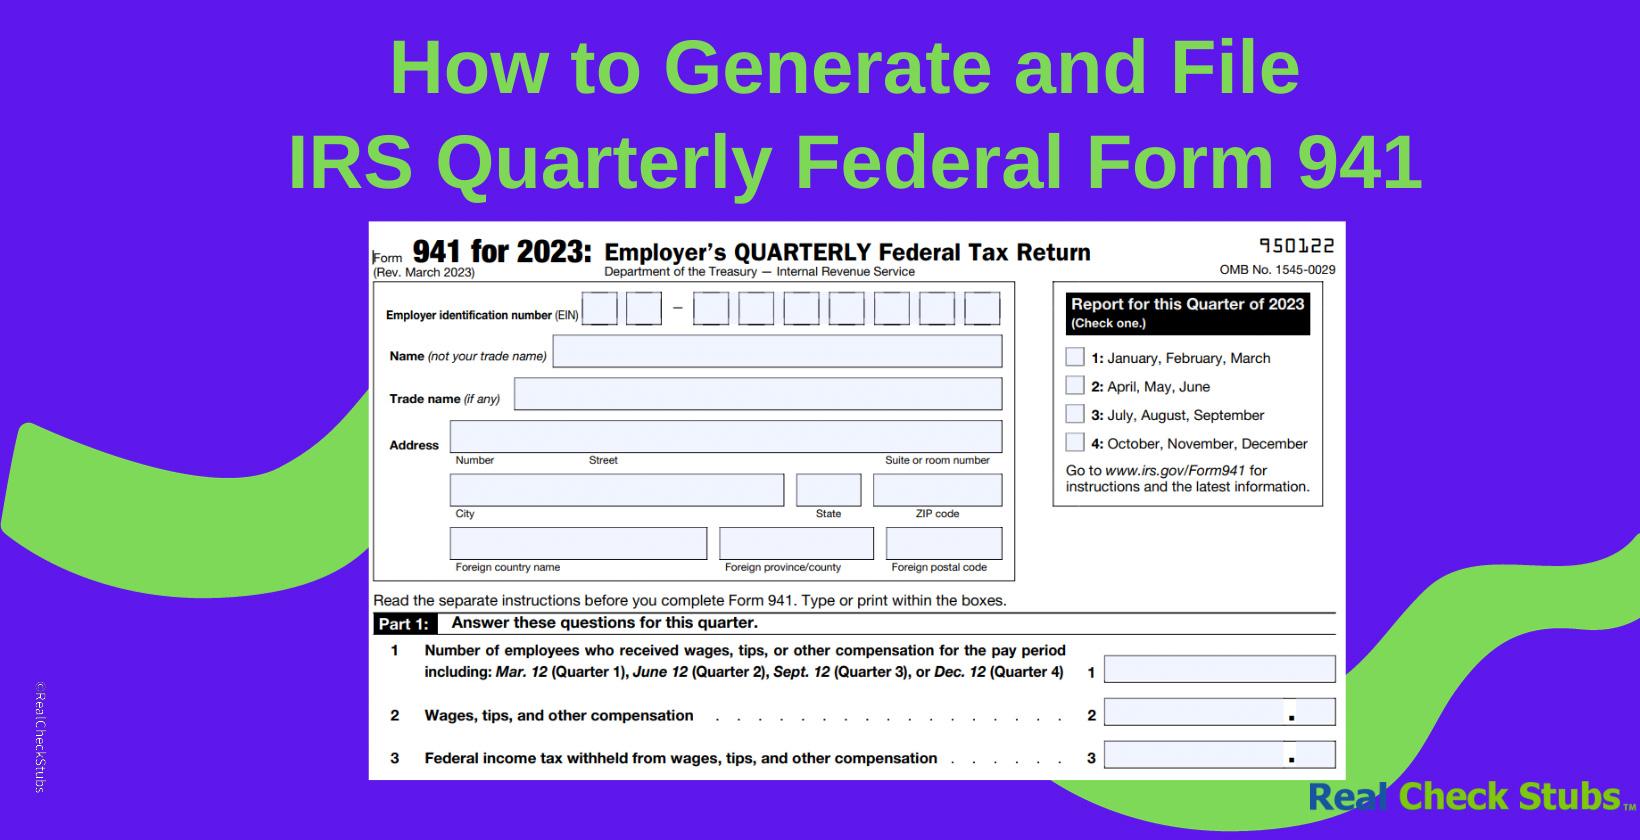 How to Generate and File IRS Quarterly Federal Form 941